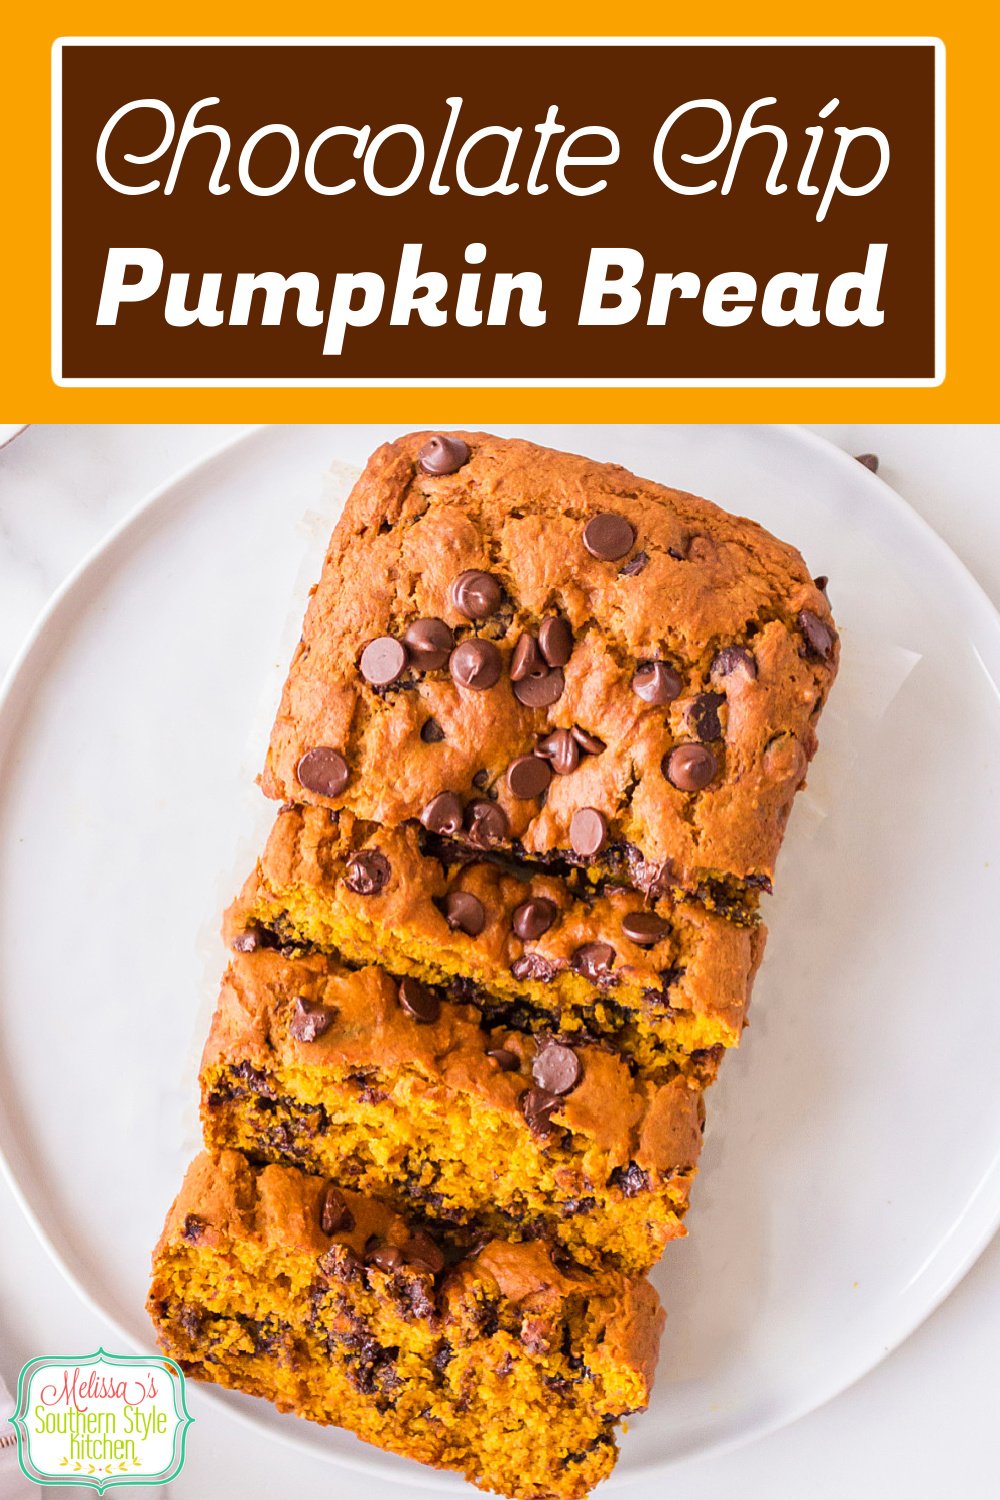 This Chocolate Chip Pumpkin Bread recipe elevates classic pumpkin bread guaranteed to delight the chocolate lovers in your life. #pumpkinrecipes #pumpkinbread #fallrecipes #pumpkin #breadrecipes #chocolatechipbread #chocolatechippumpkinbread via @melissasssk